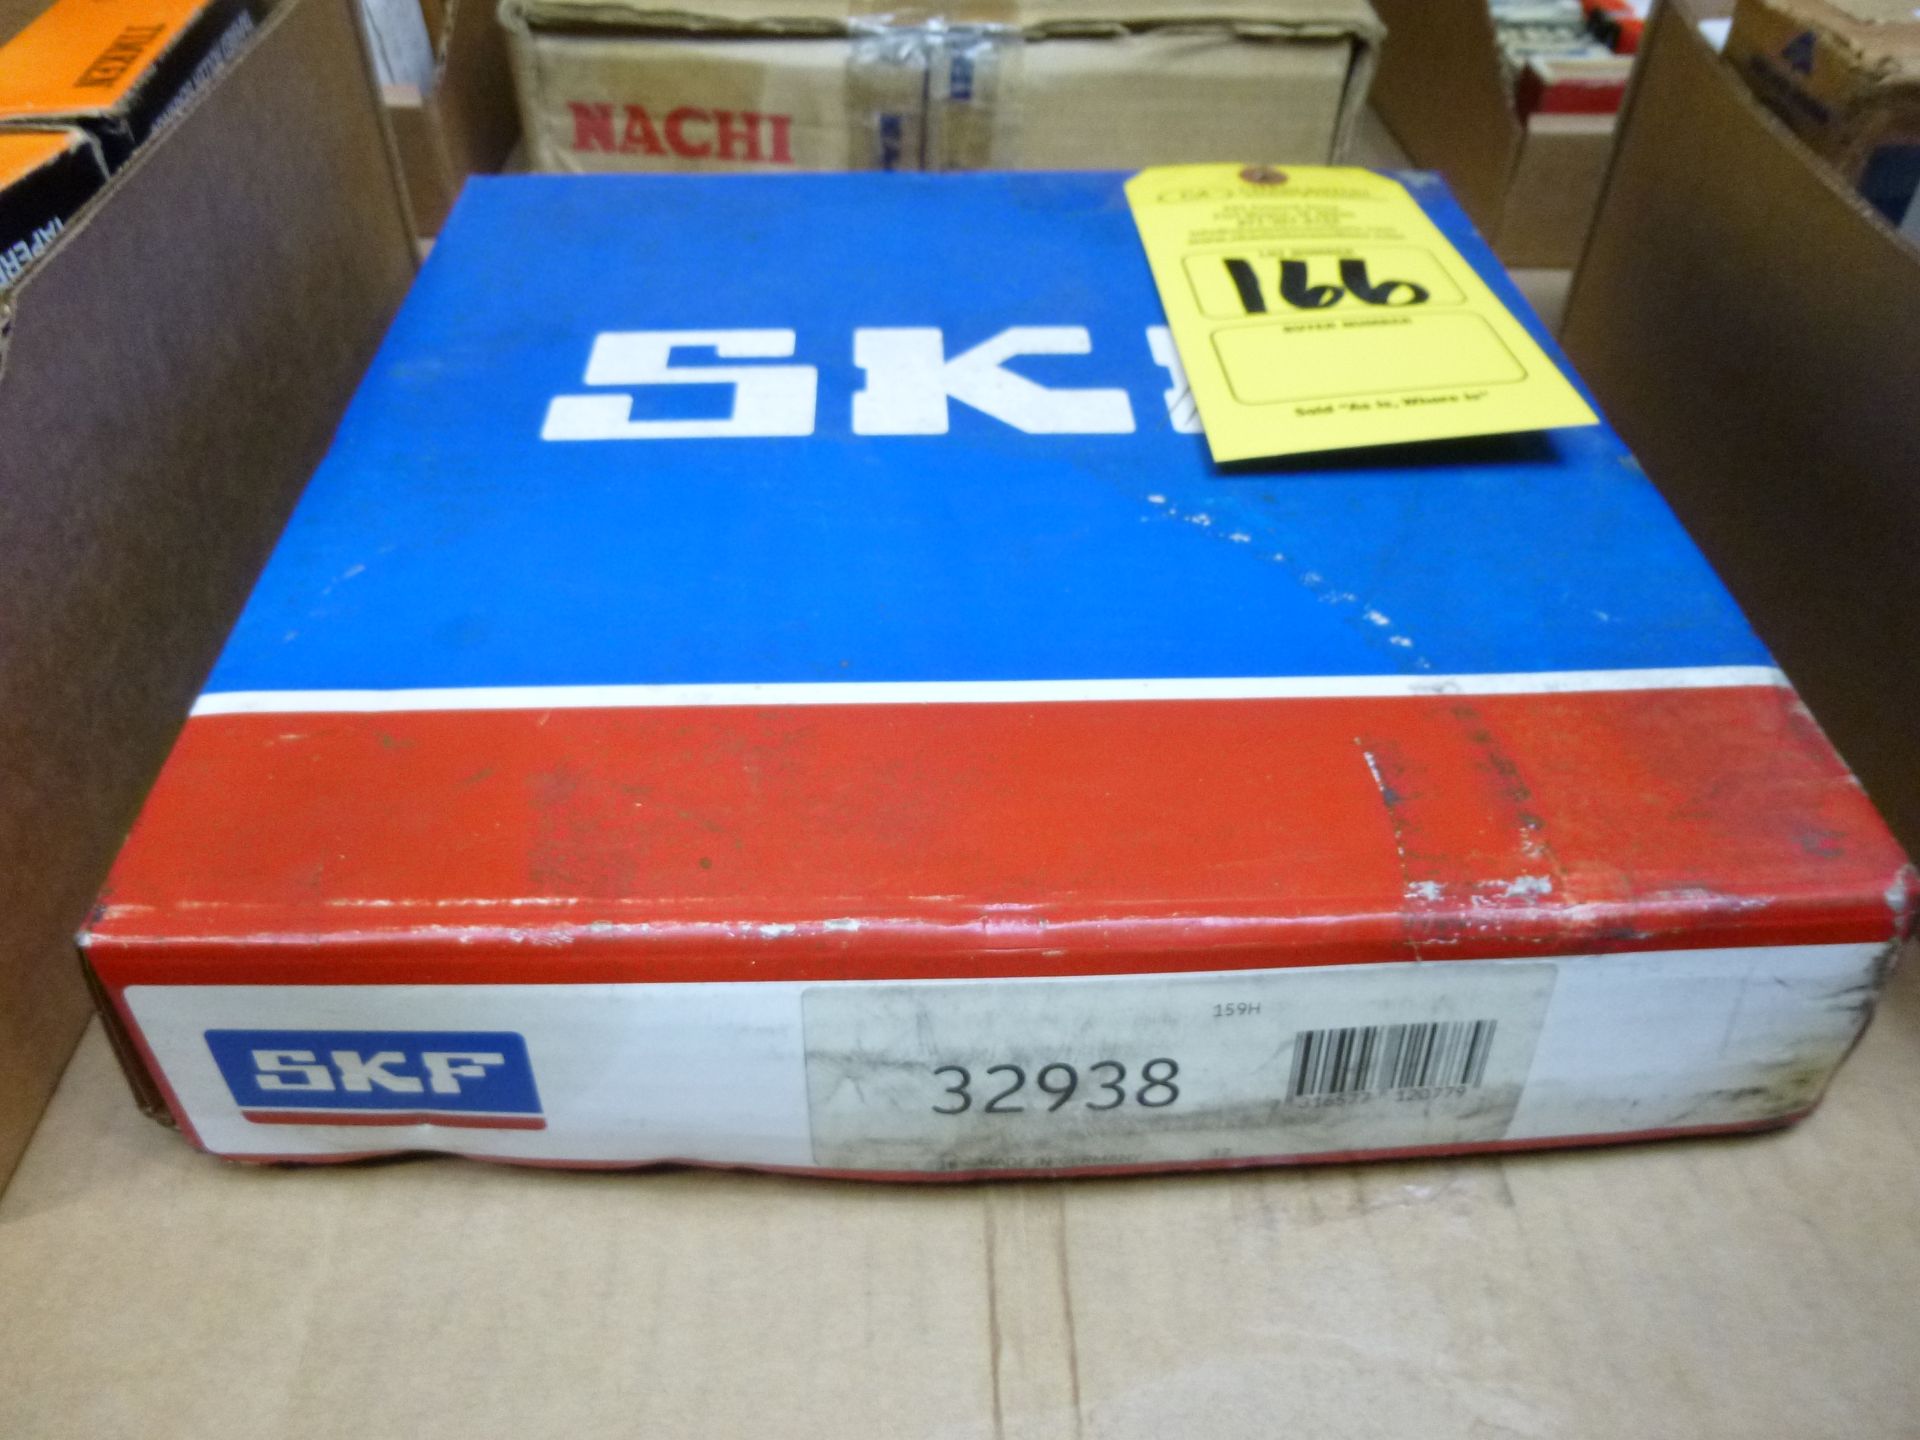 (Qty 1) SKF 32938 bearing (new in box) Shipping can be prepared for either ground package or LTL for